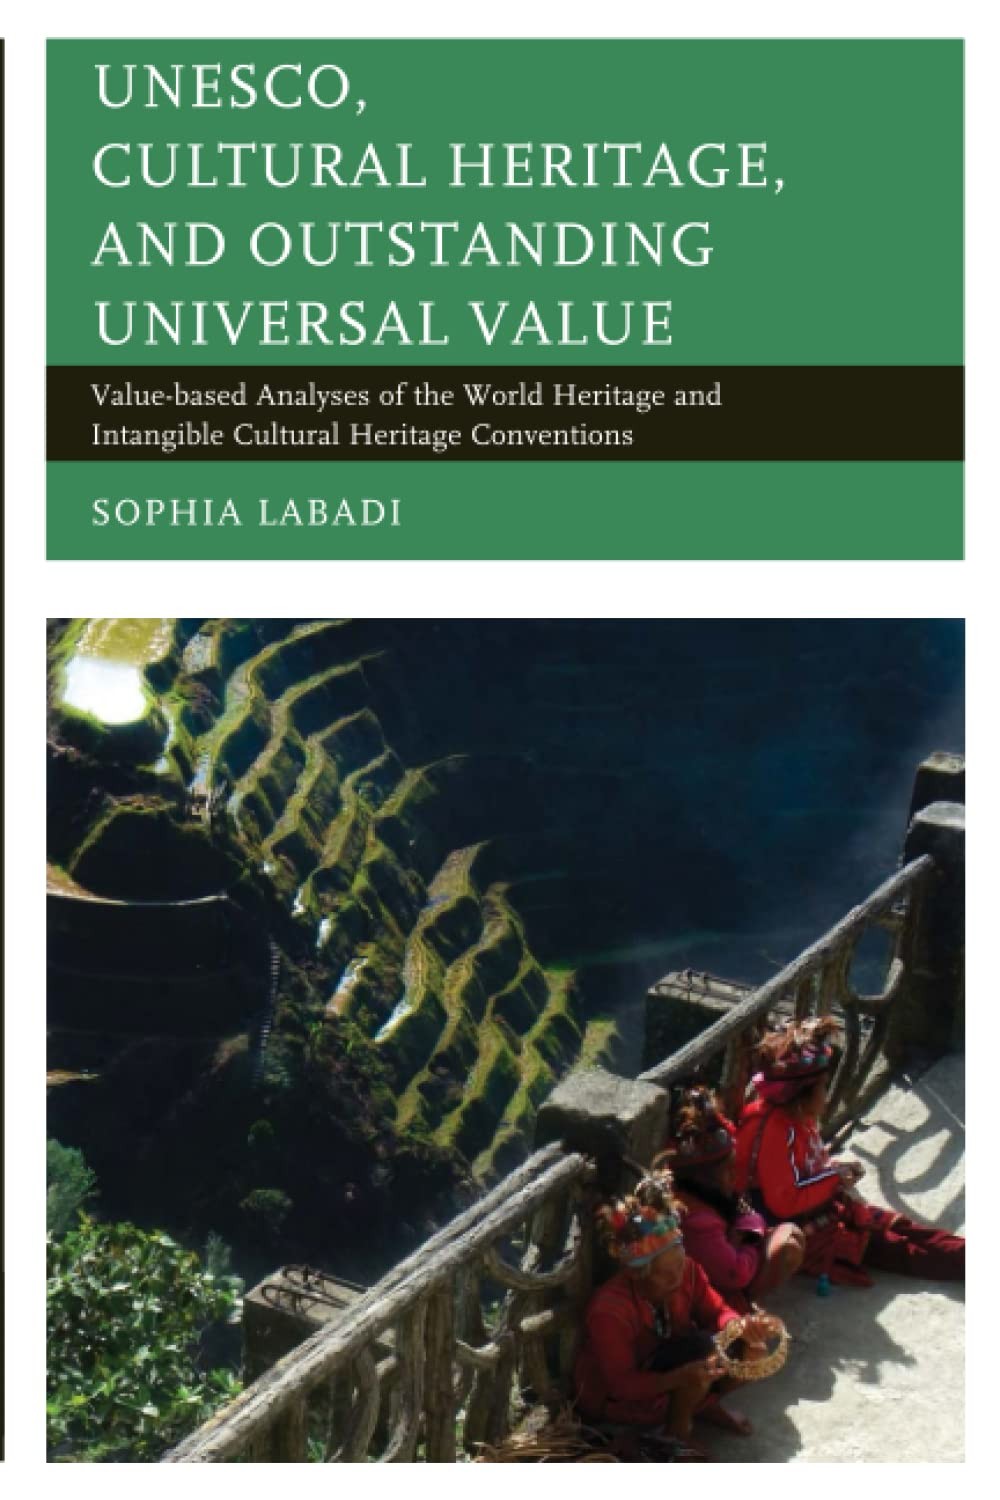 UNESCO, Cultural Heritage, and Outstanding Universal Value: Value-Based Analyses of the World Heritage and Intangible Cultural Heritage Conventions